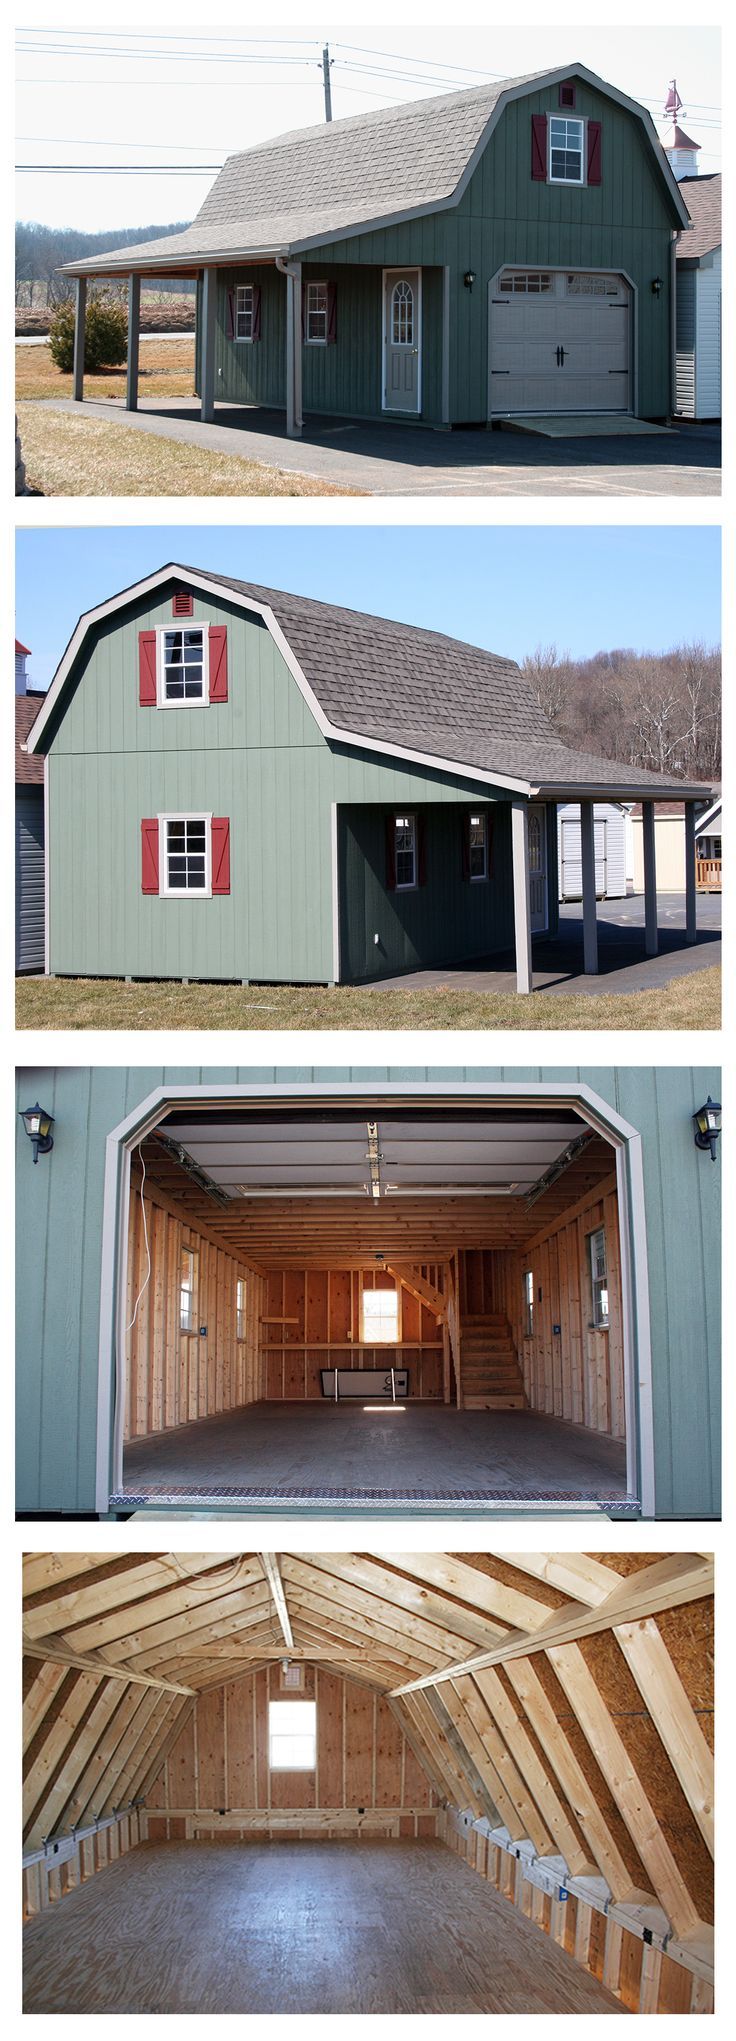 1 Car 1 Story Garage. The gambrel (“barn style”) roof maximizes storage space on the upper level.